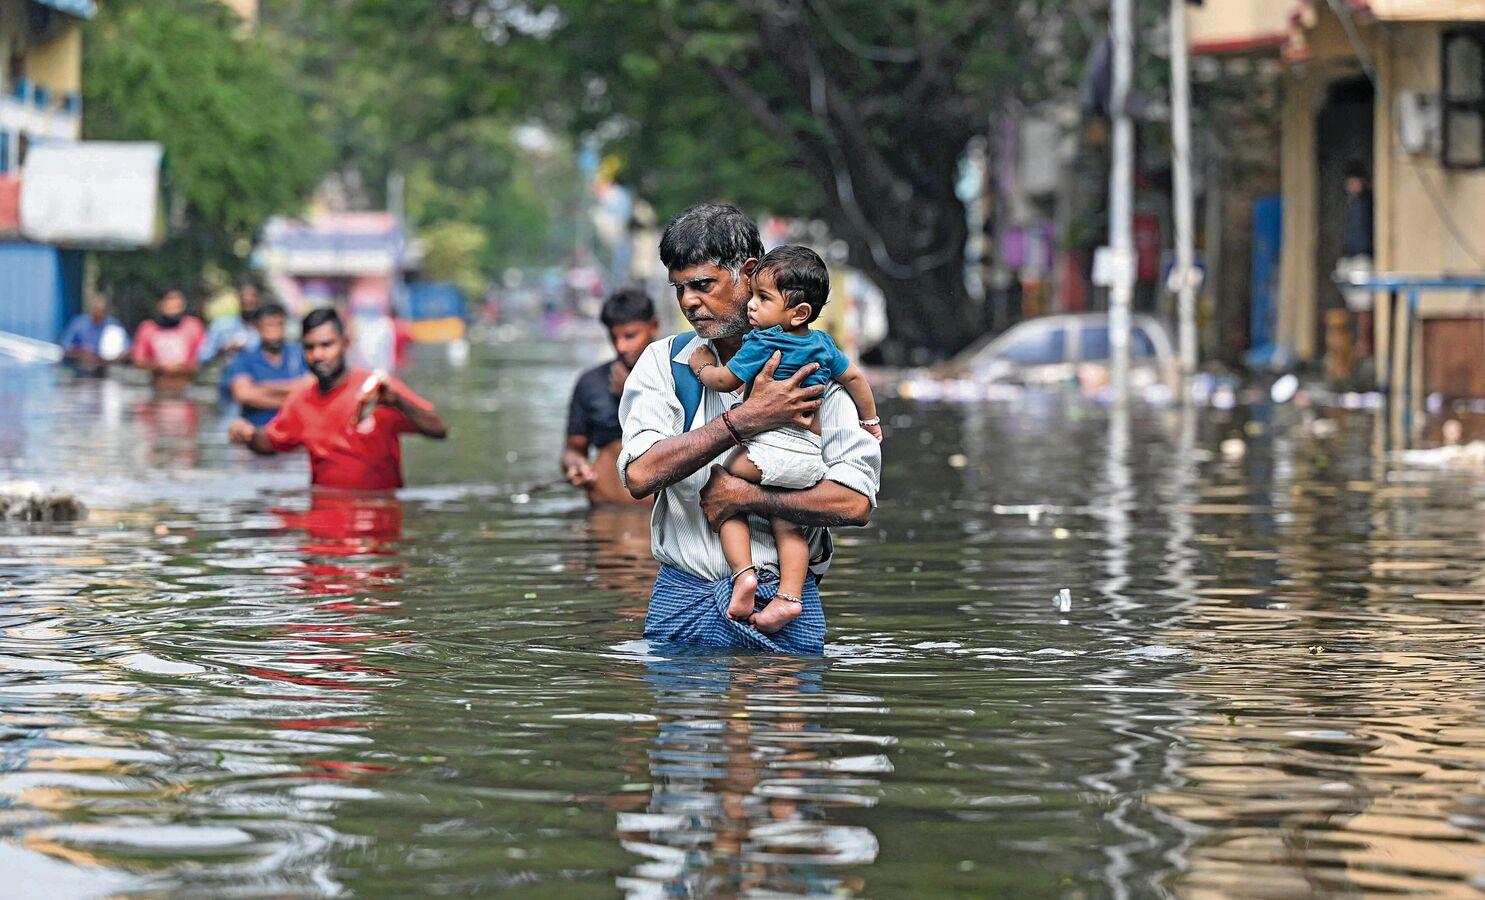 Stormy Monday In Chennai: Why Are Our Cities So Flood-Prone?